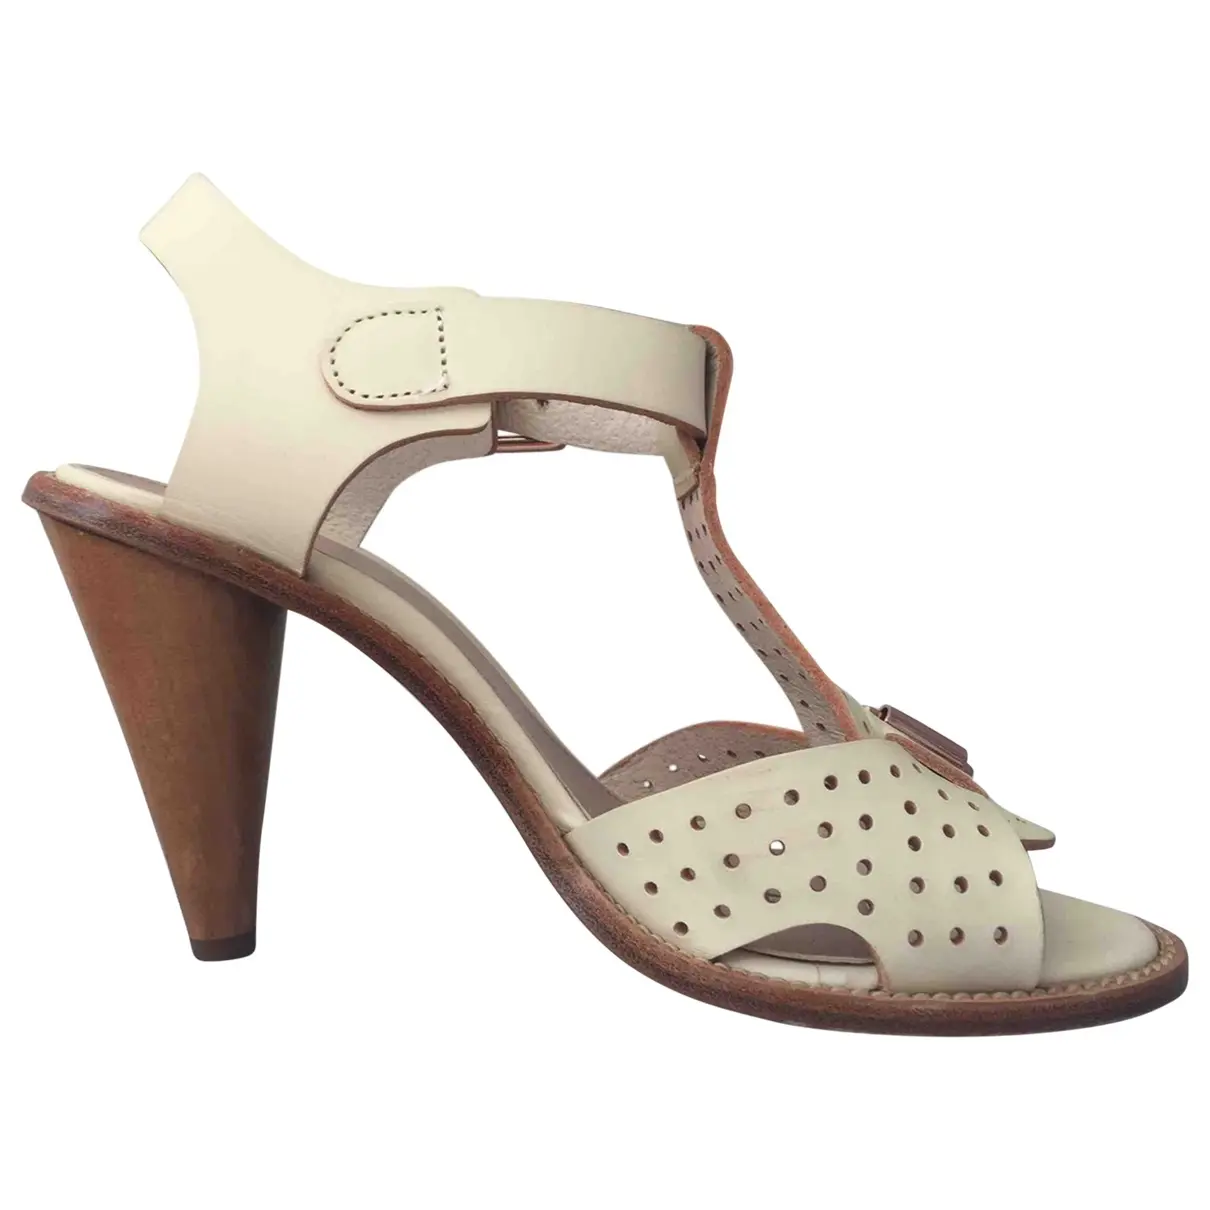 Leather sandals Mulberry